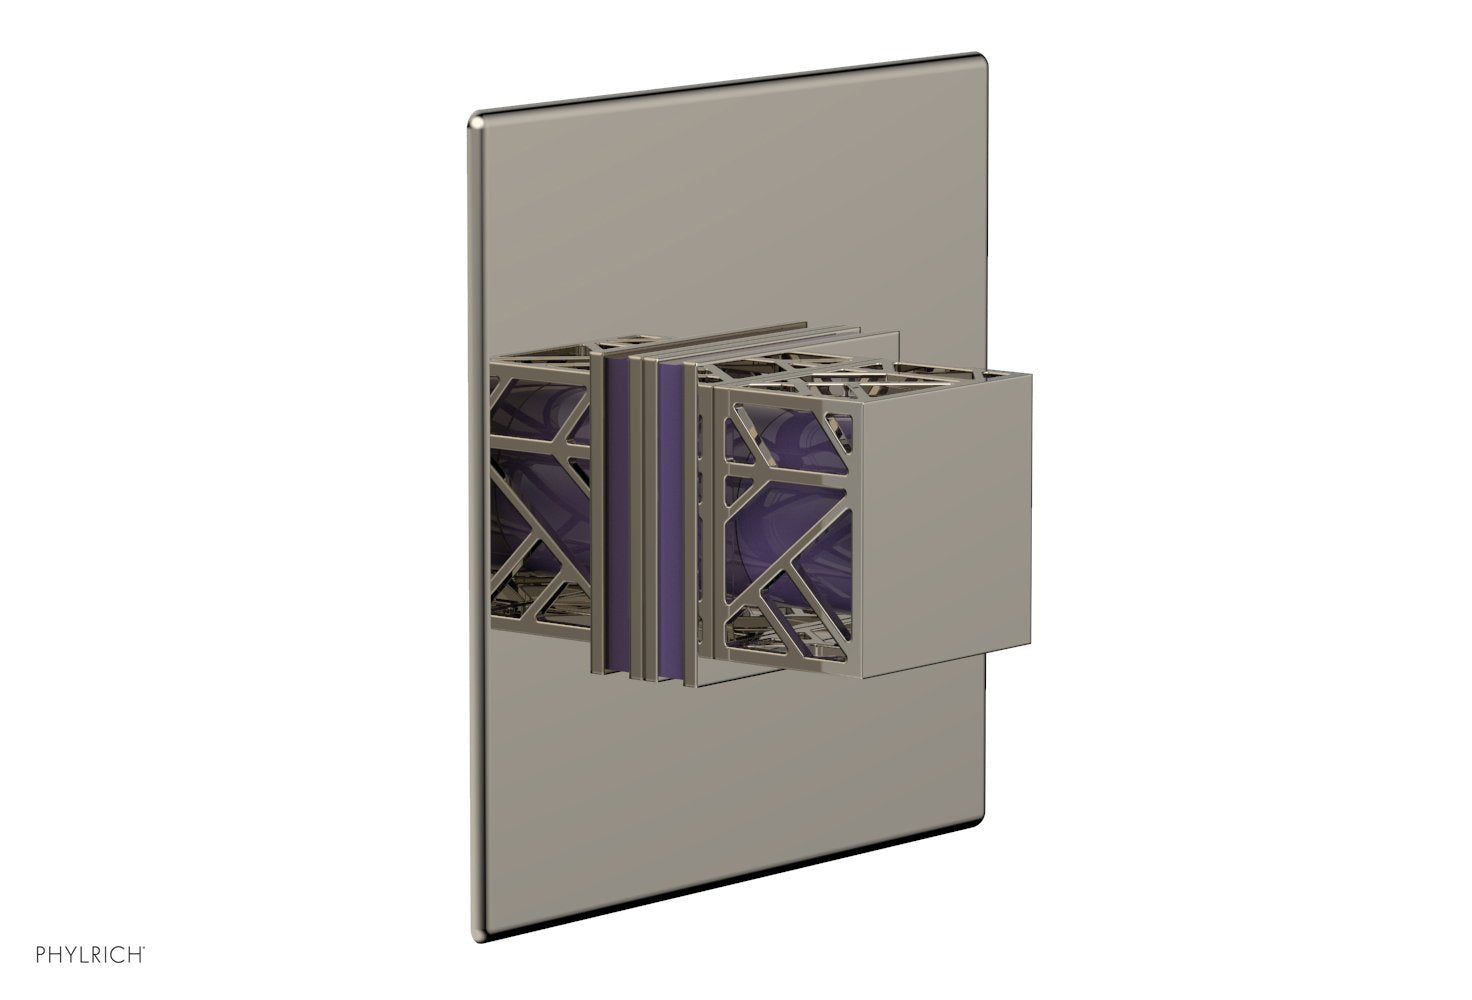 Phylrich JOLIE Thermostatic Shower Trim, Square Handle with "Purple" Accents